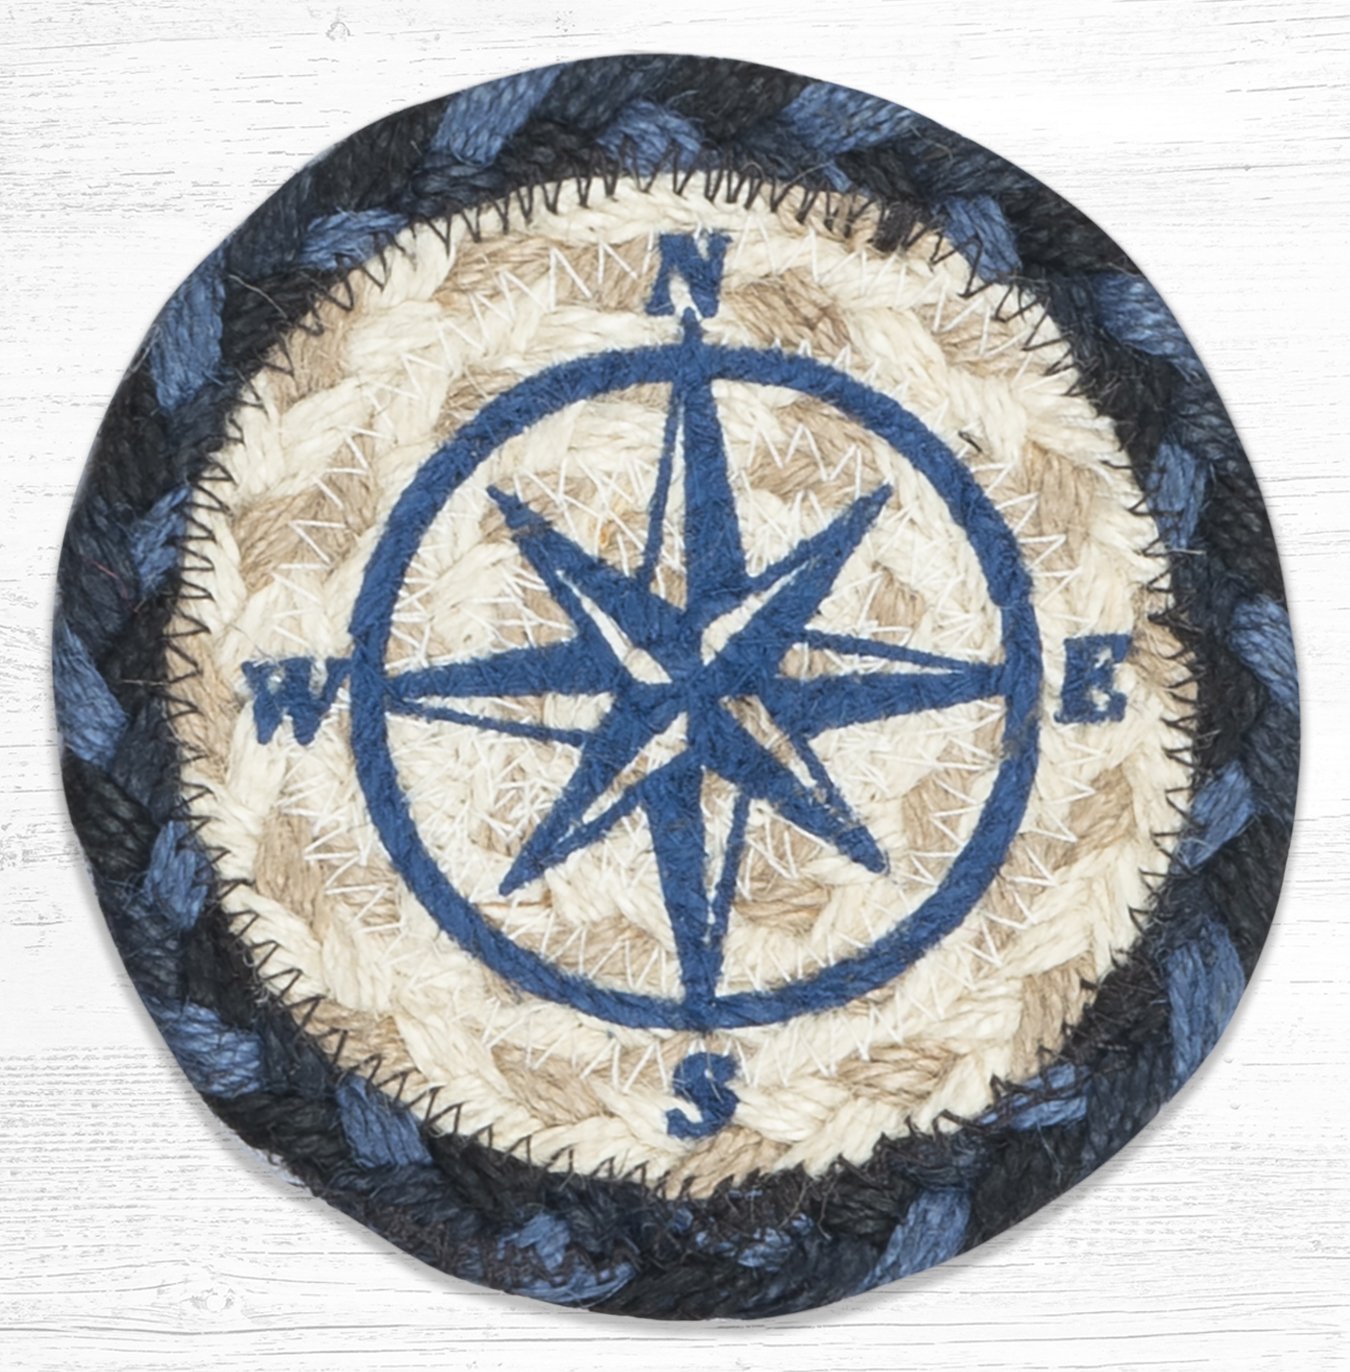 Compass Rose Printed Braided Coaster 5"x5" Set of 4